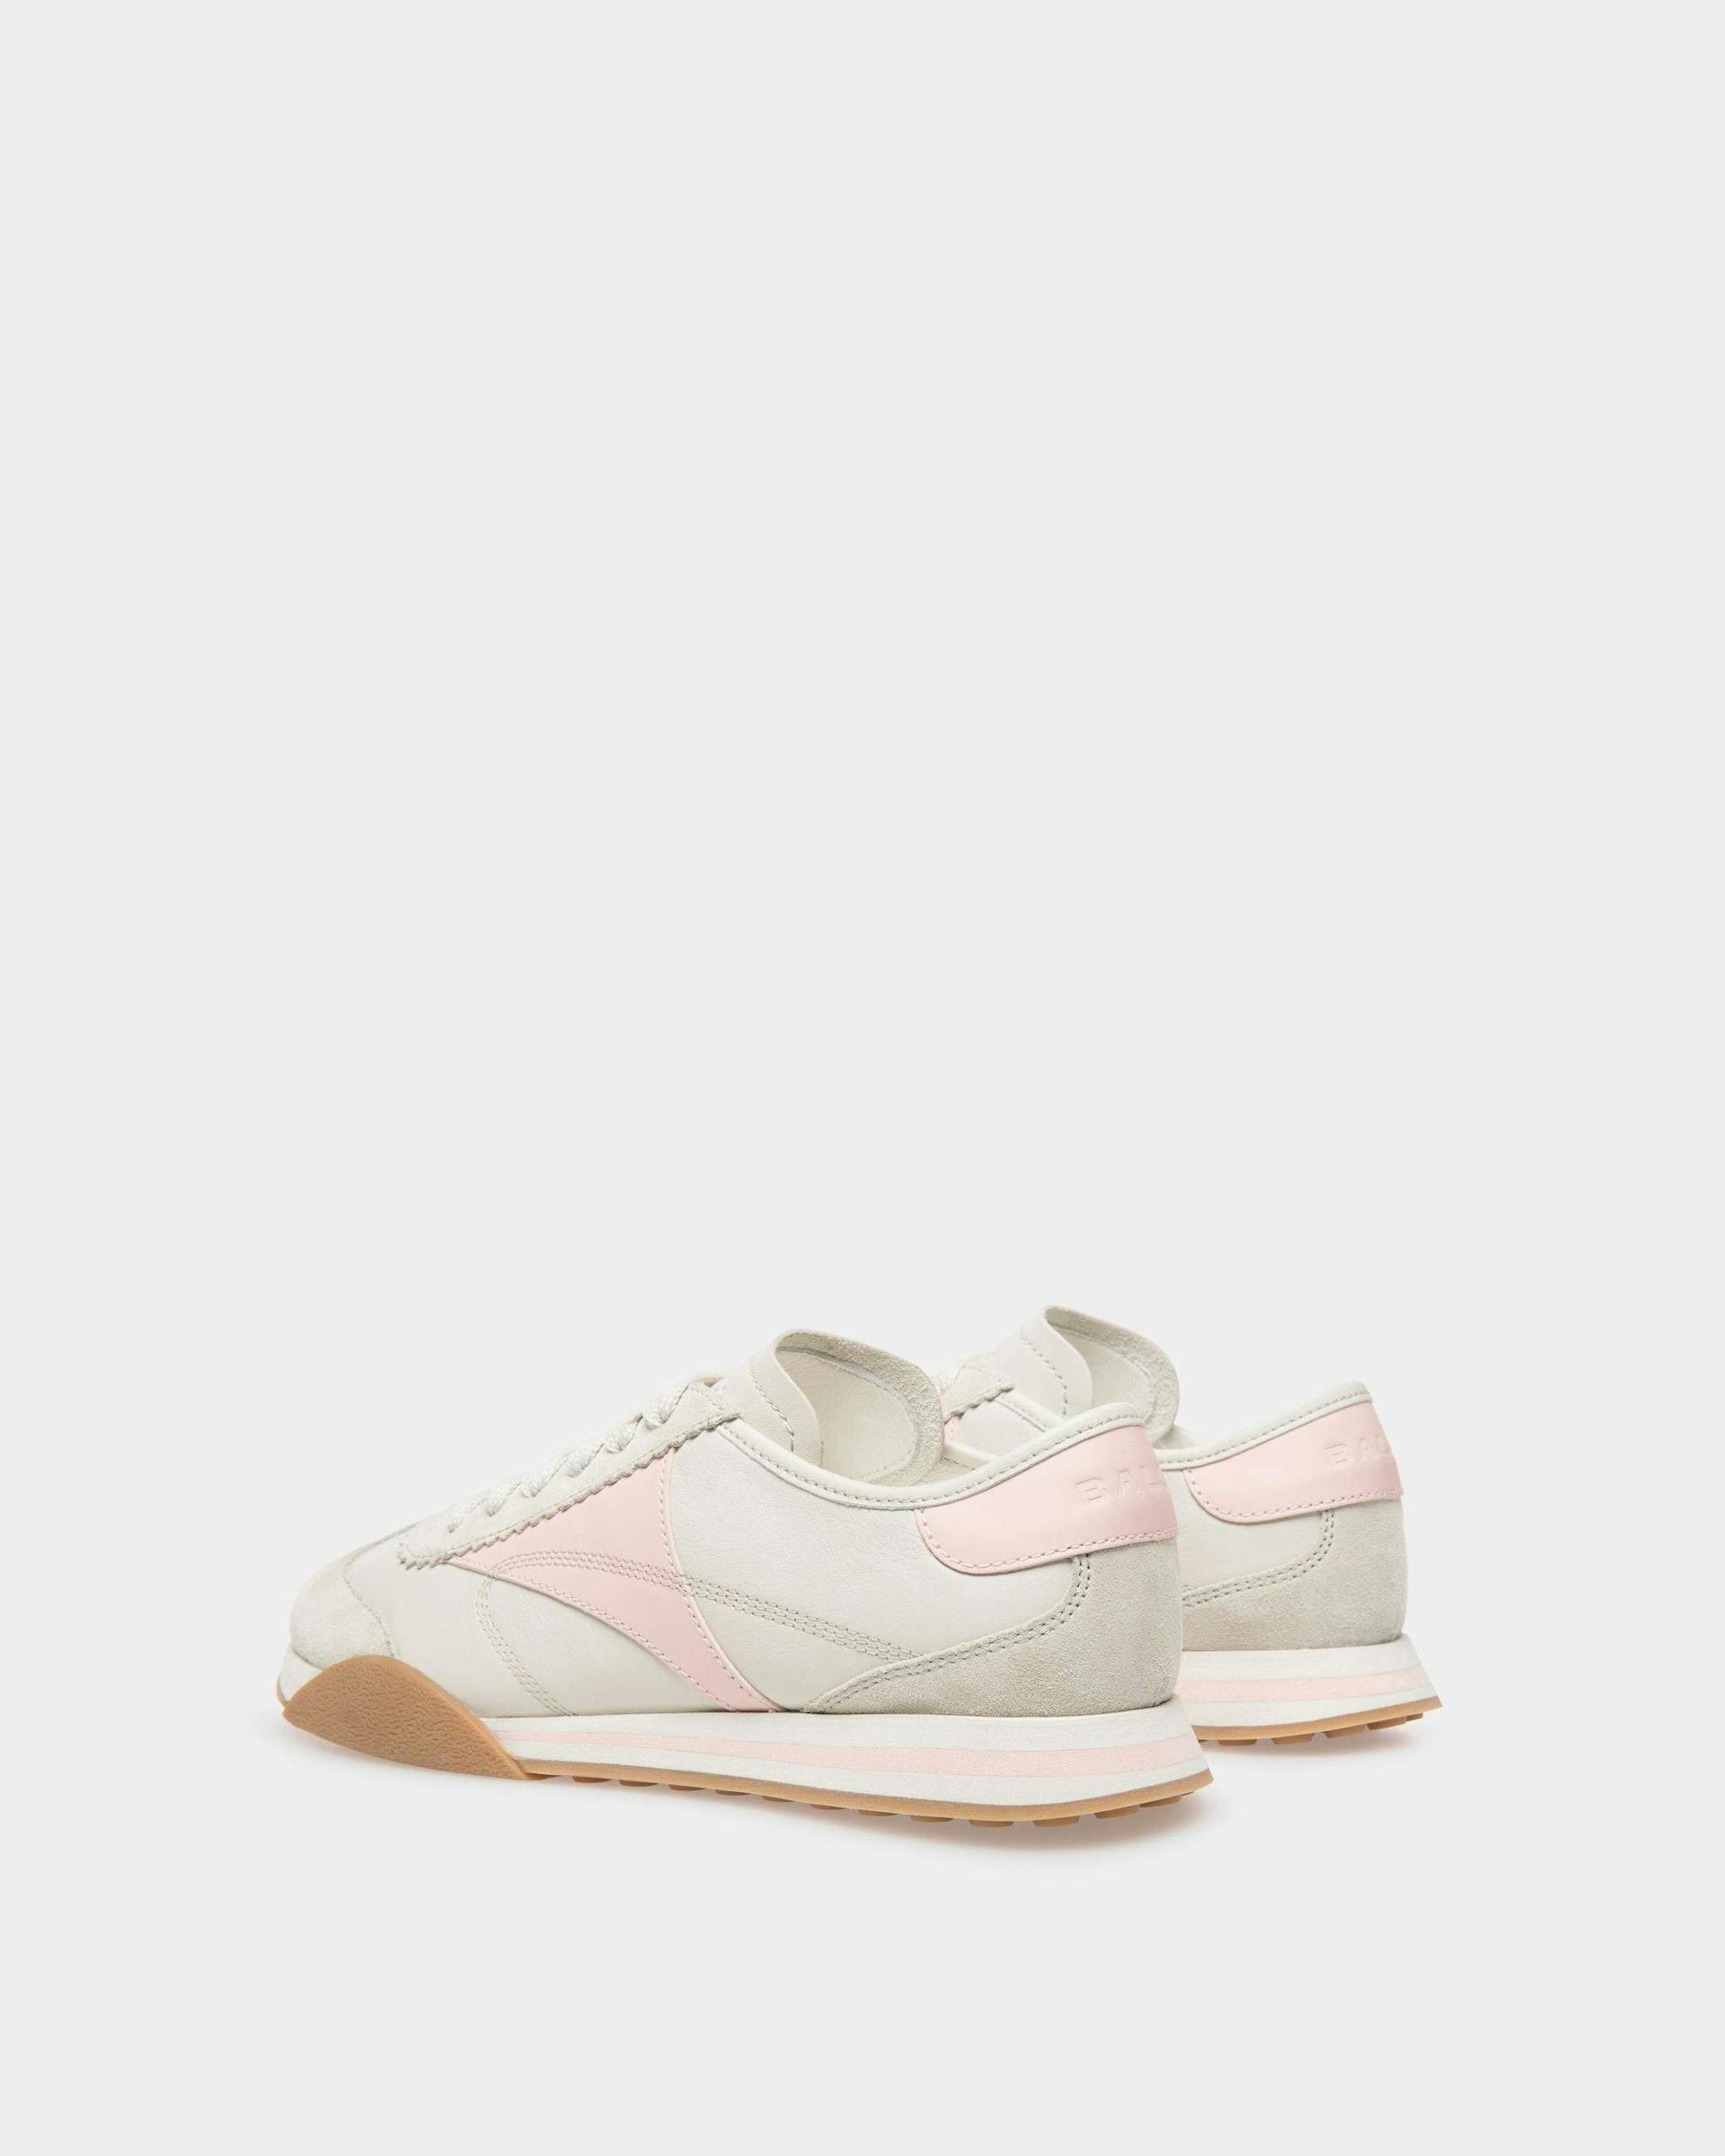 Women's Sussex Sneakers In Dusty White And Rose Leather | Bally | Still Life 3/4 Back